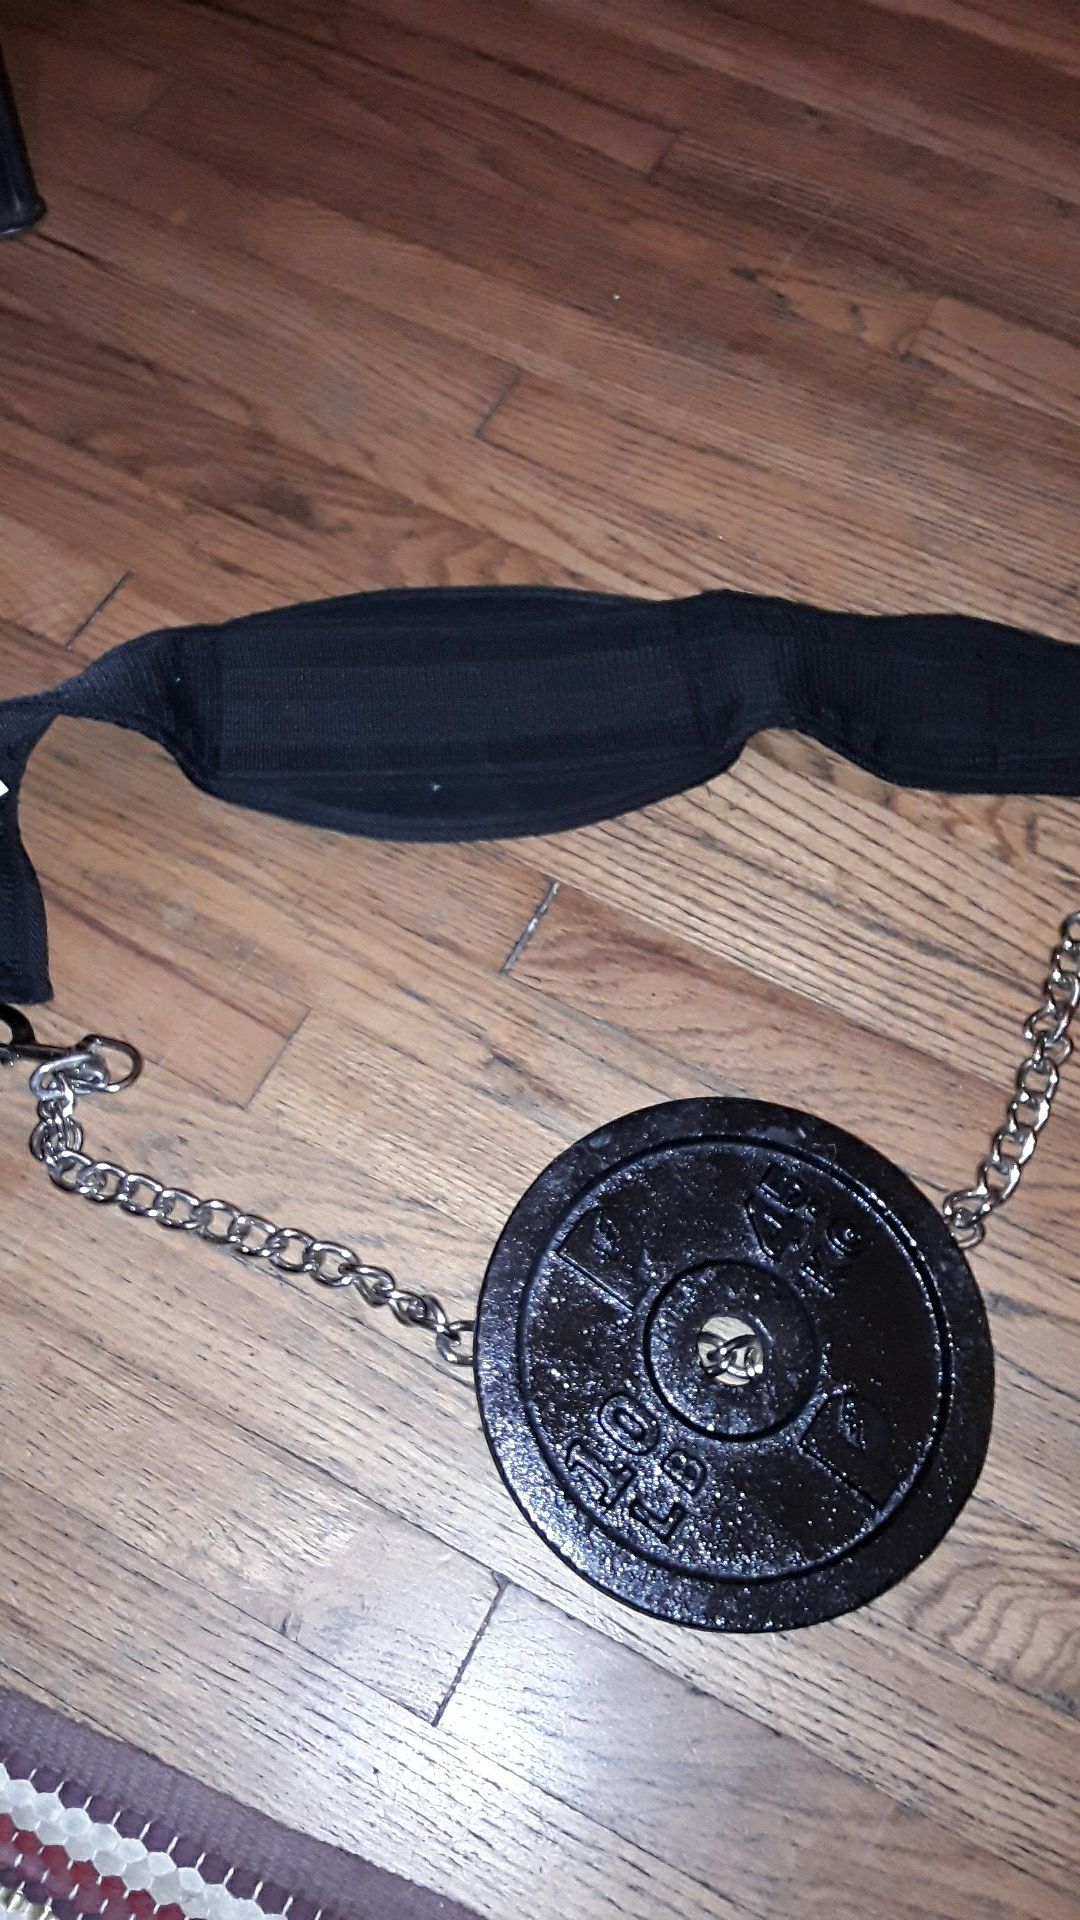 Weight plates dipping weight belt ( weights not included )